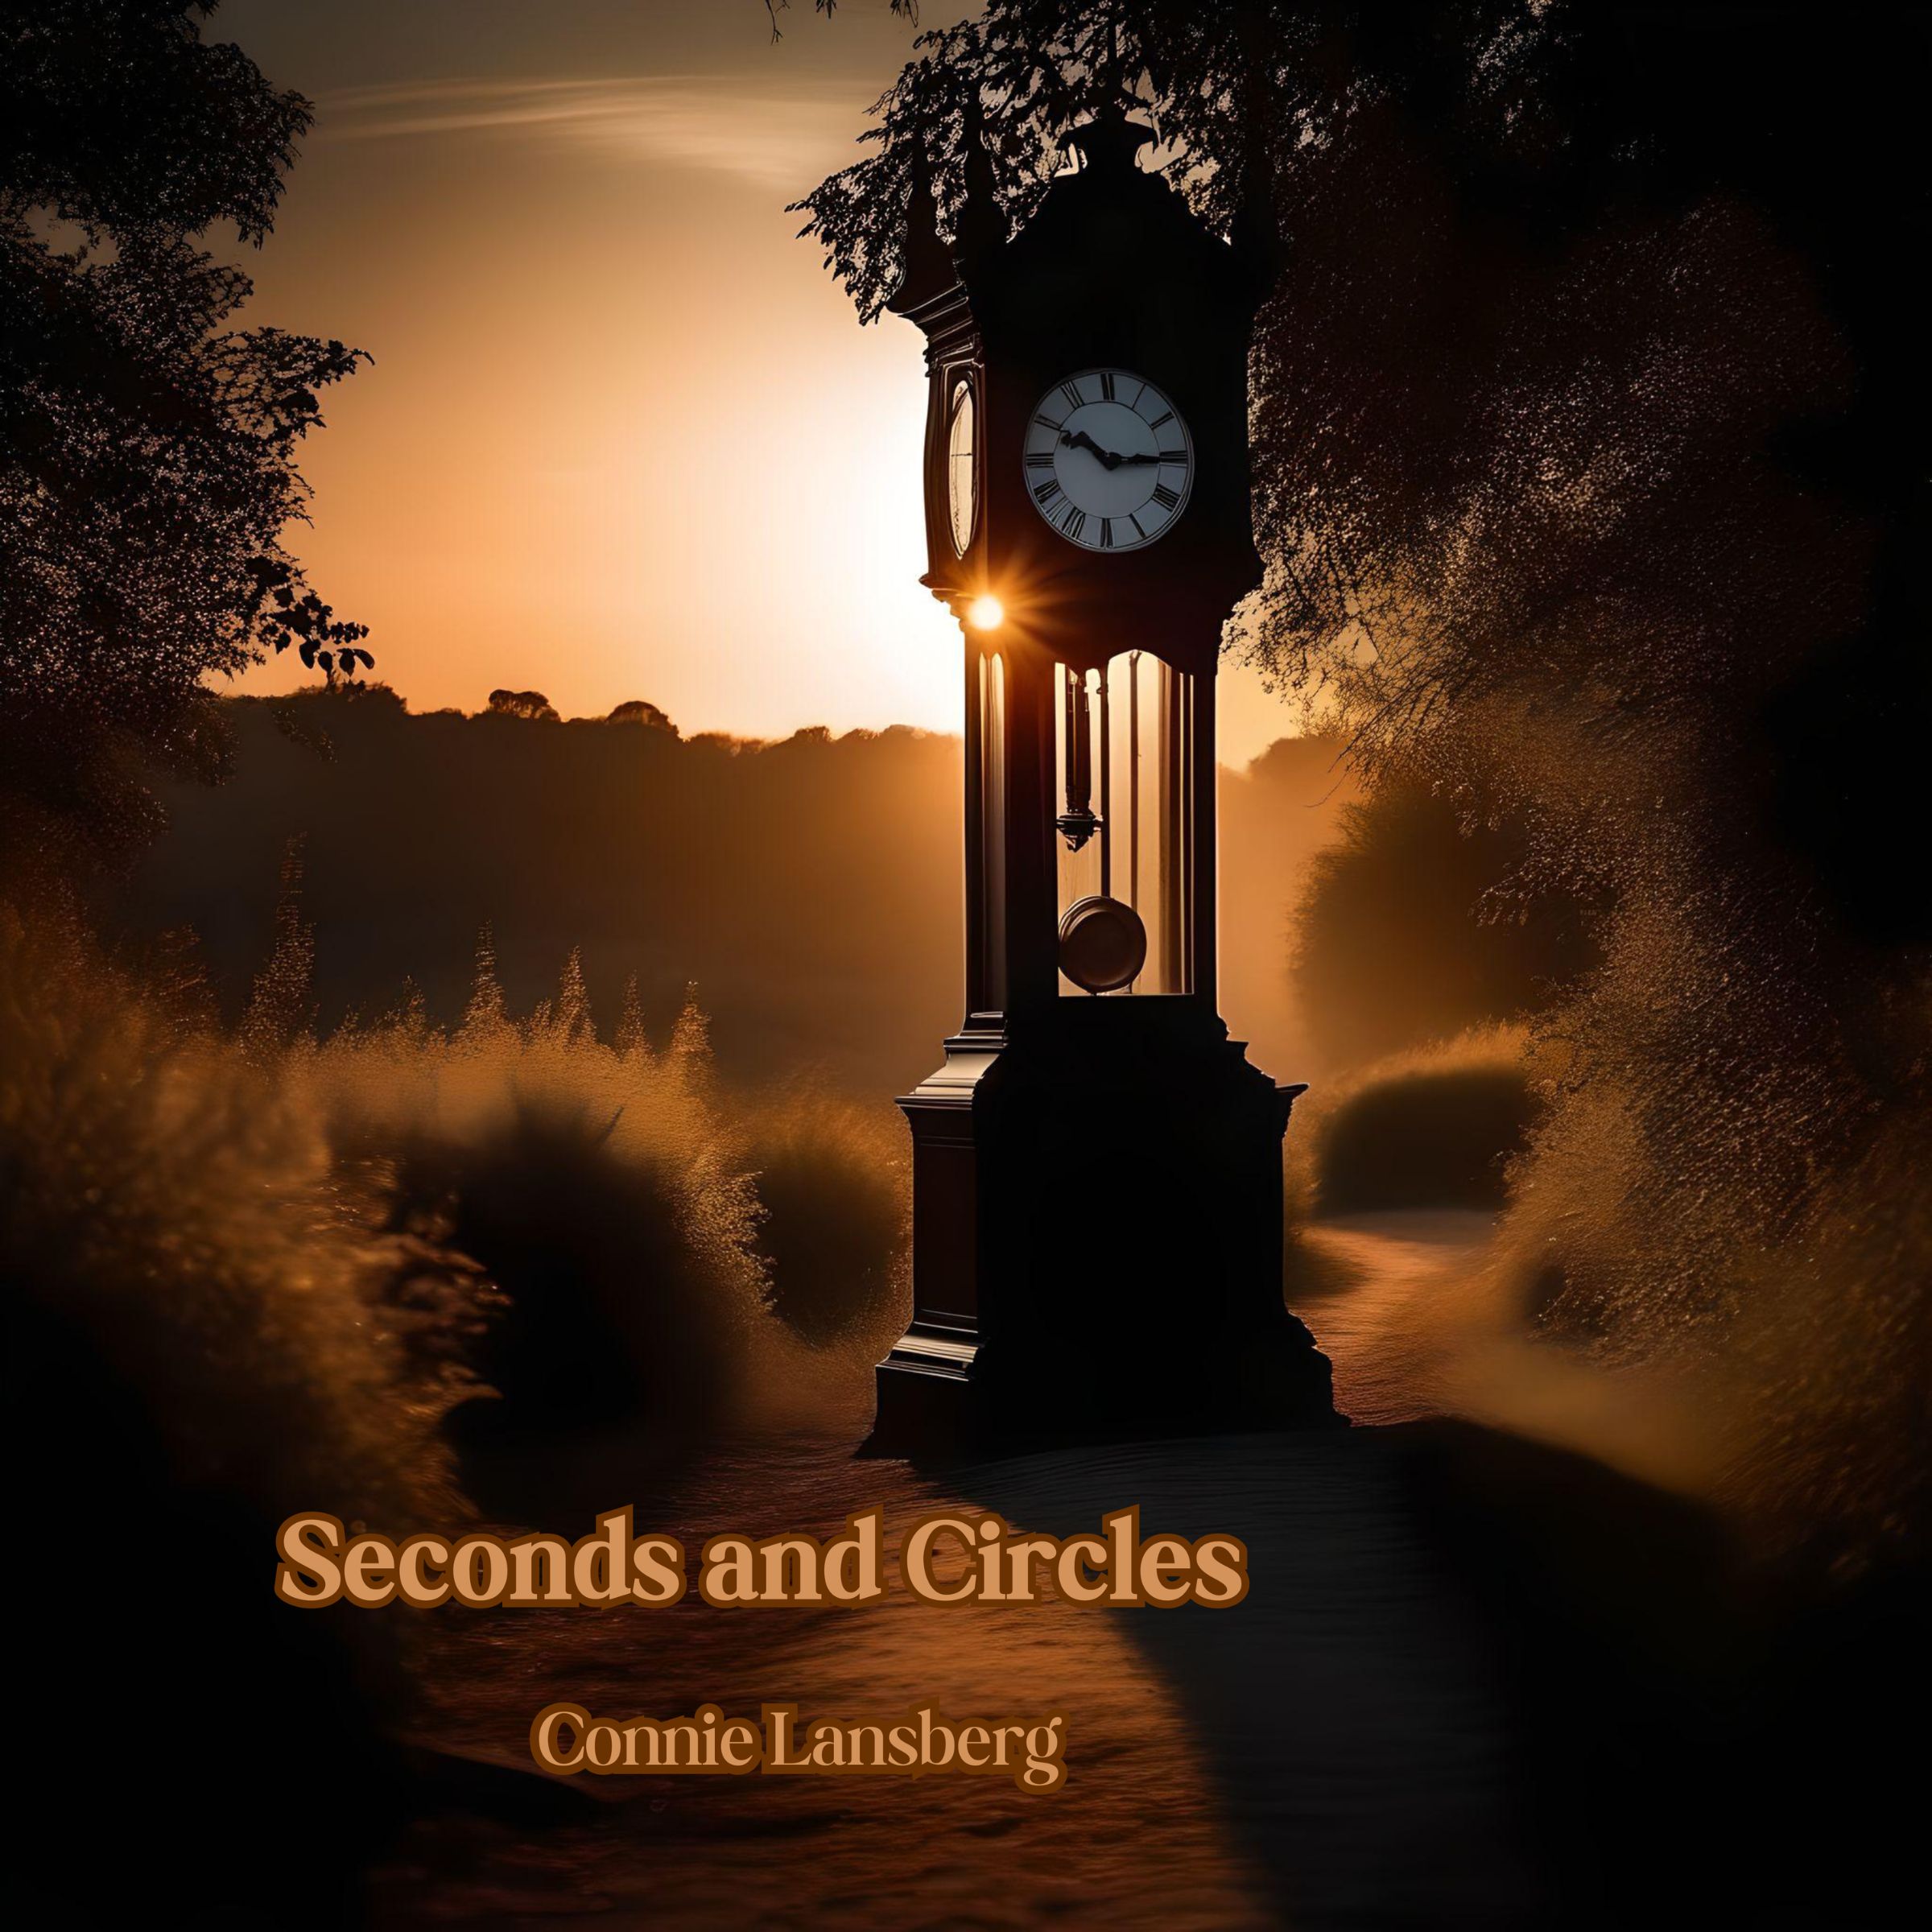 Connie Lansberg – “Seconds and Circles”